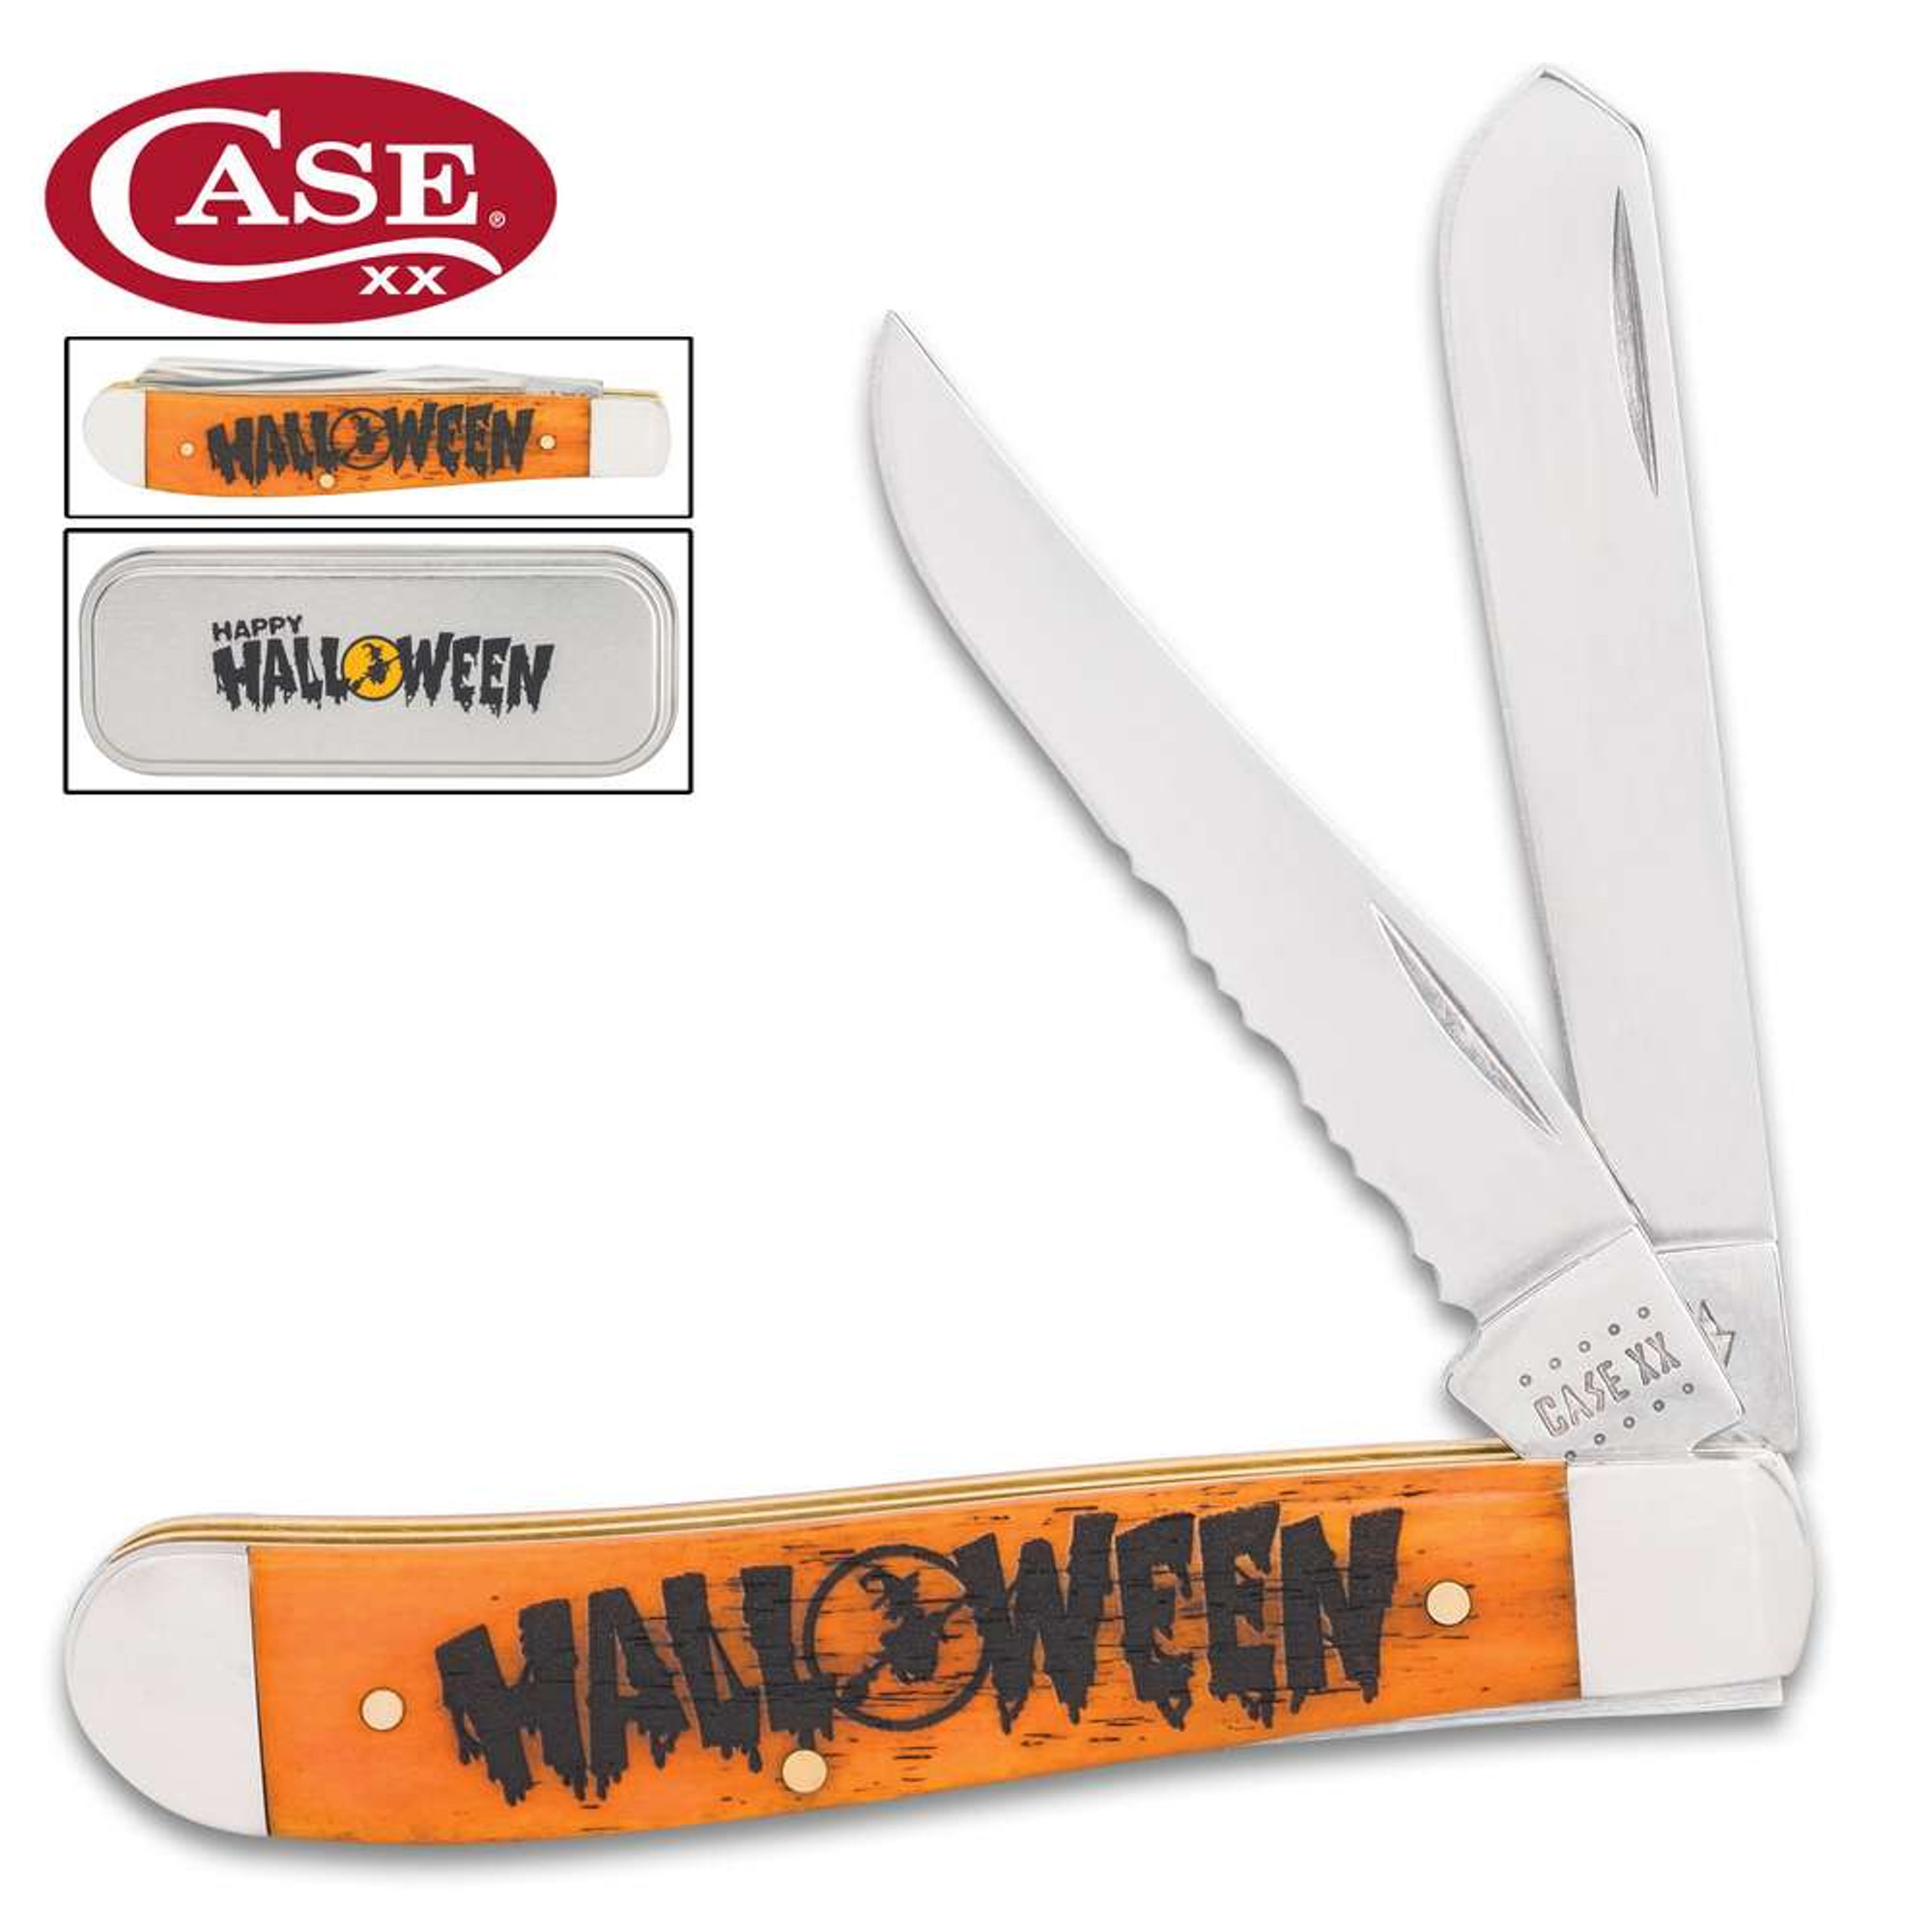 Case Halloween Mini Trapper Pocket Knife With Gift Tin